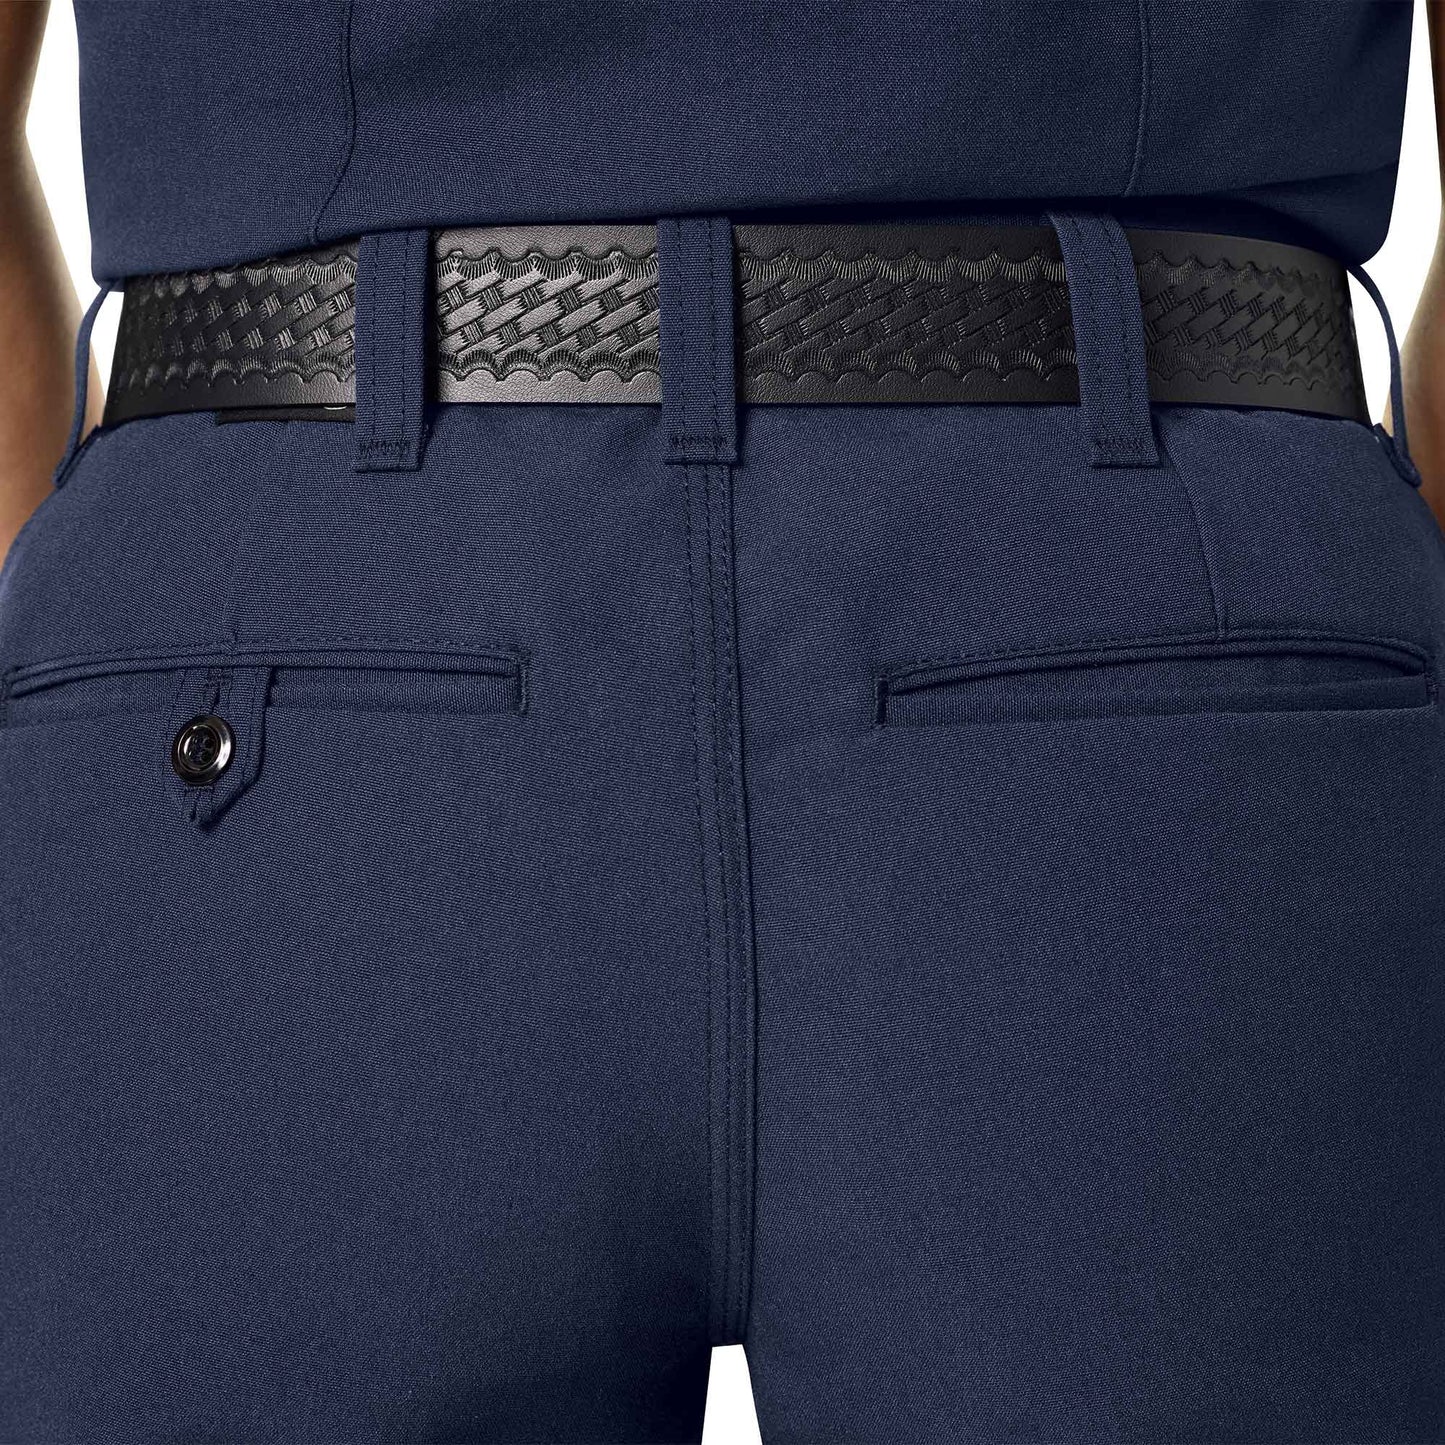 Women's Classic Firefighter Pant